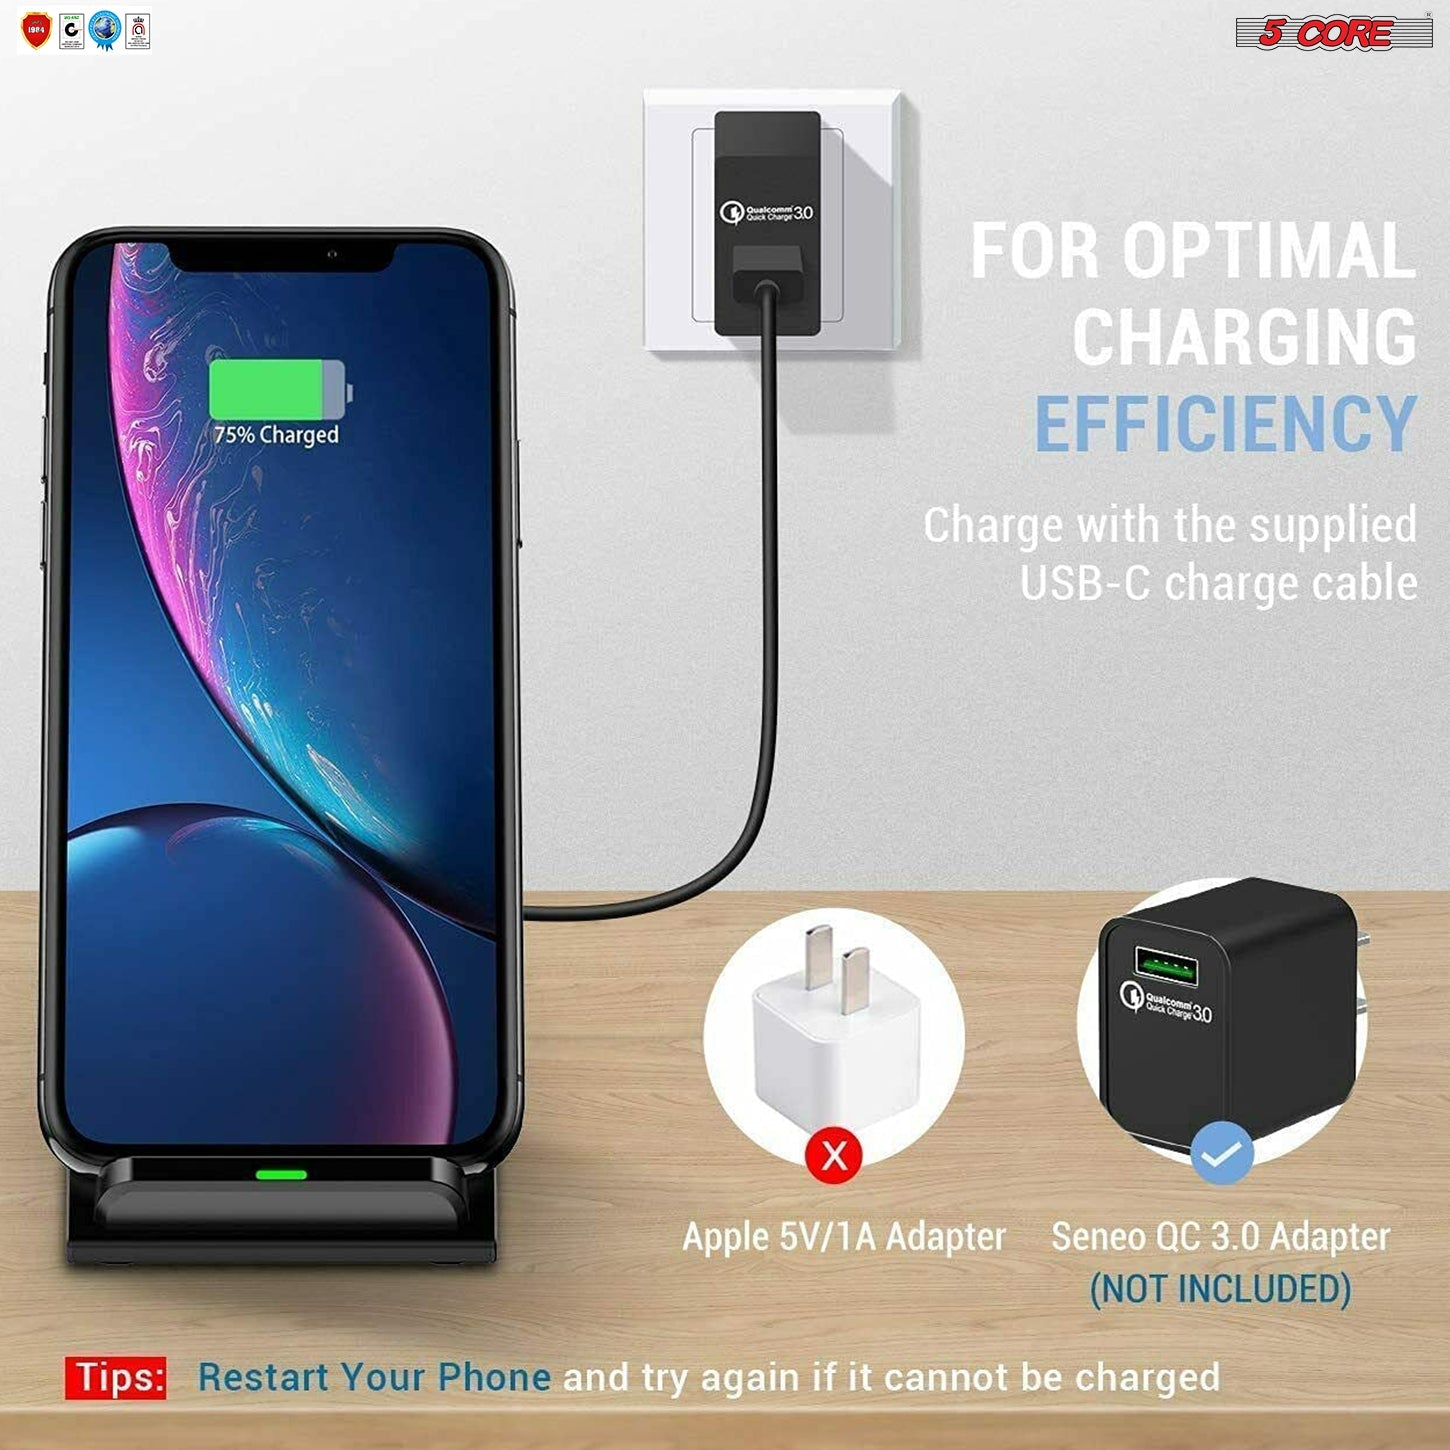 5 Core Magsafe Charger 1 Piece Black Portable Wireless Charging Station Fast Phone Charger Stand w Sleep Friendly LED 2 Charging Coil Samsumg iPhone Wireless Fast Charging Stand - 10W Black-6